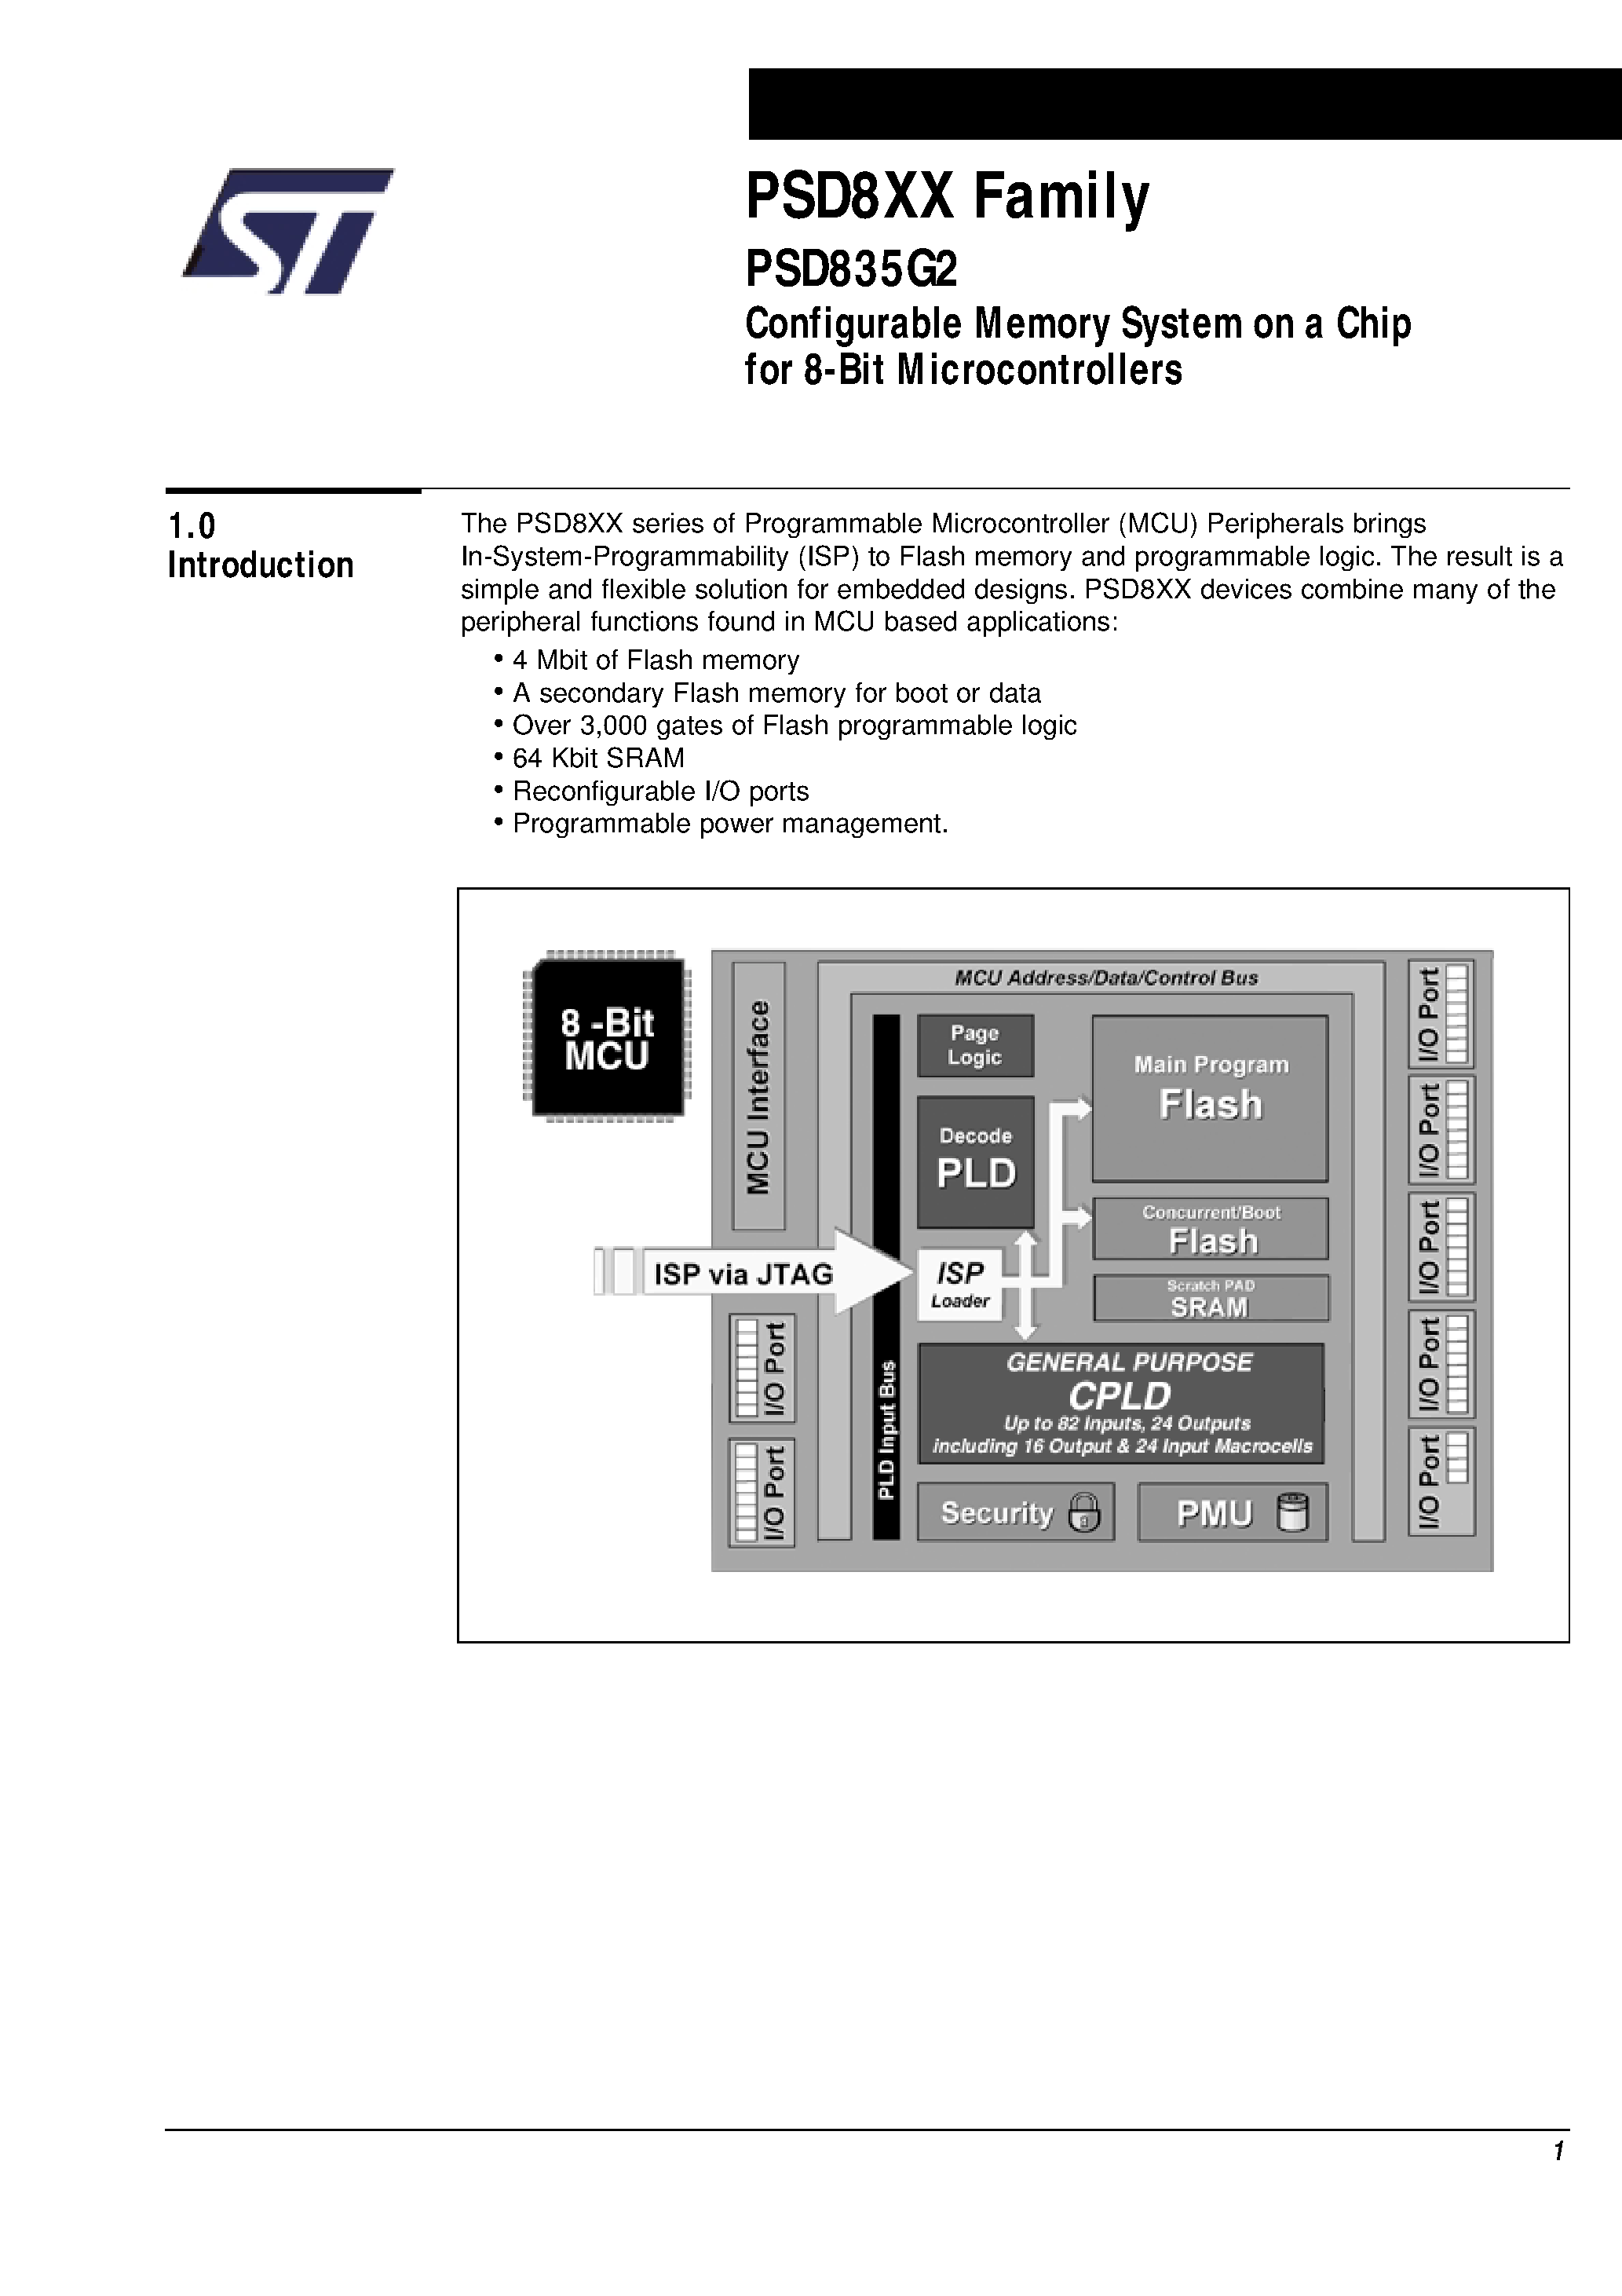 Datasheet PSD835F2-A-70J - Configurable Memory System on a Chip for 8-Bit Microcontrollers page 2